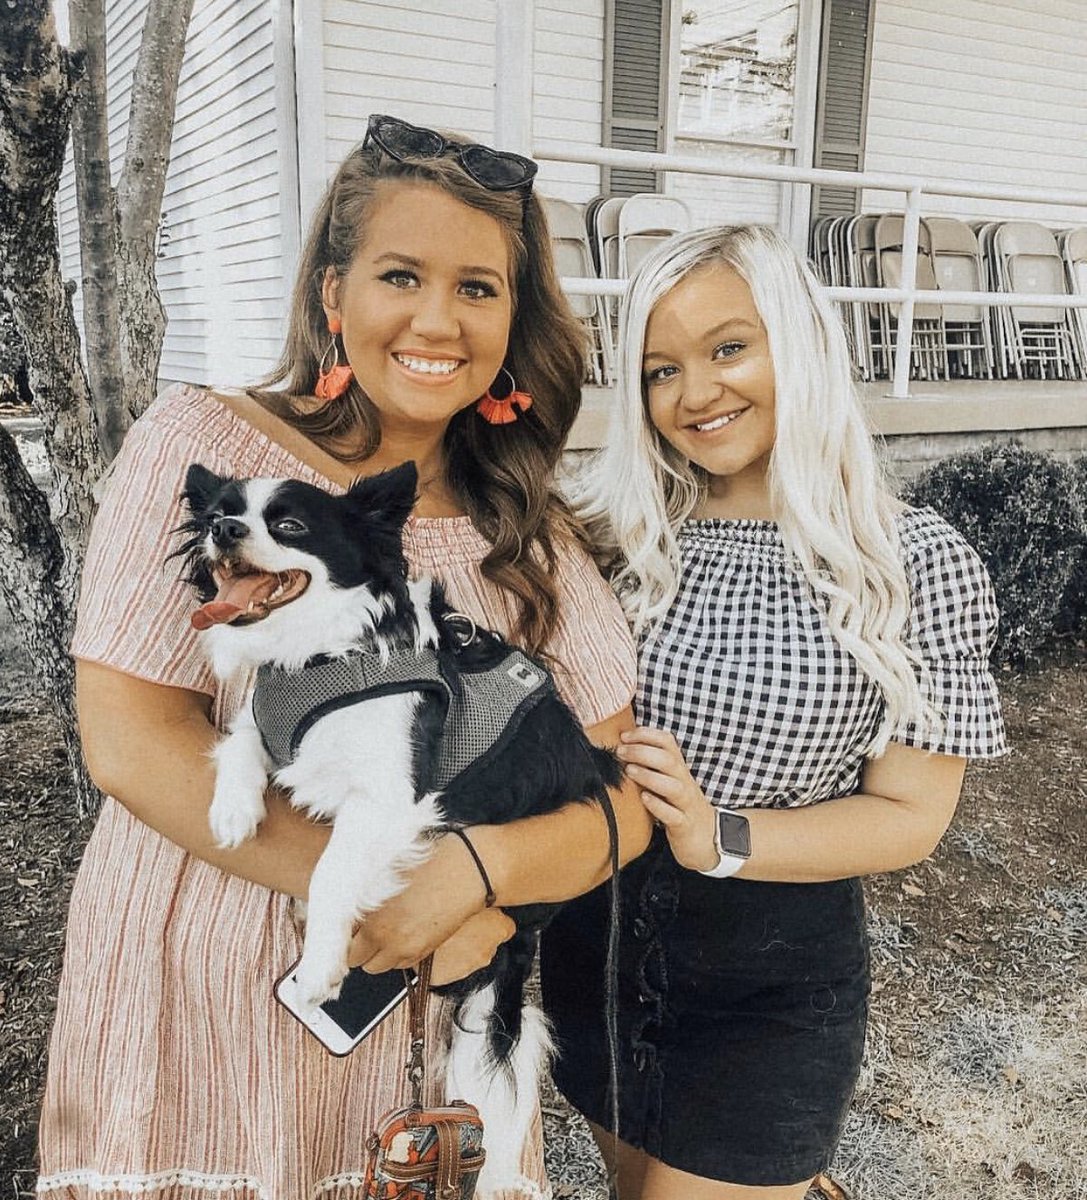 proud of my baby sis @Bprobertson1 for being accepted to @WKUHonors 🤩 ready for you to be on the hill!!